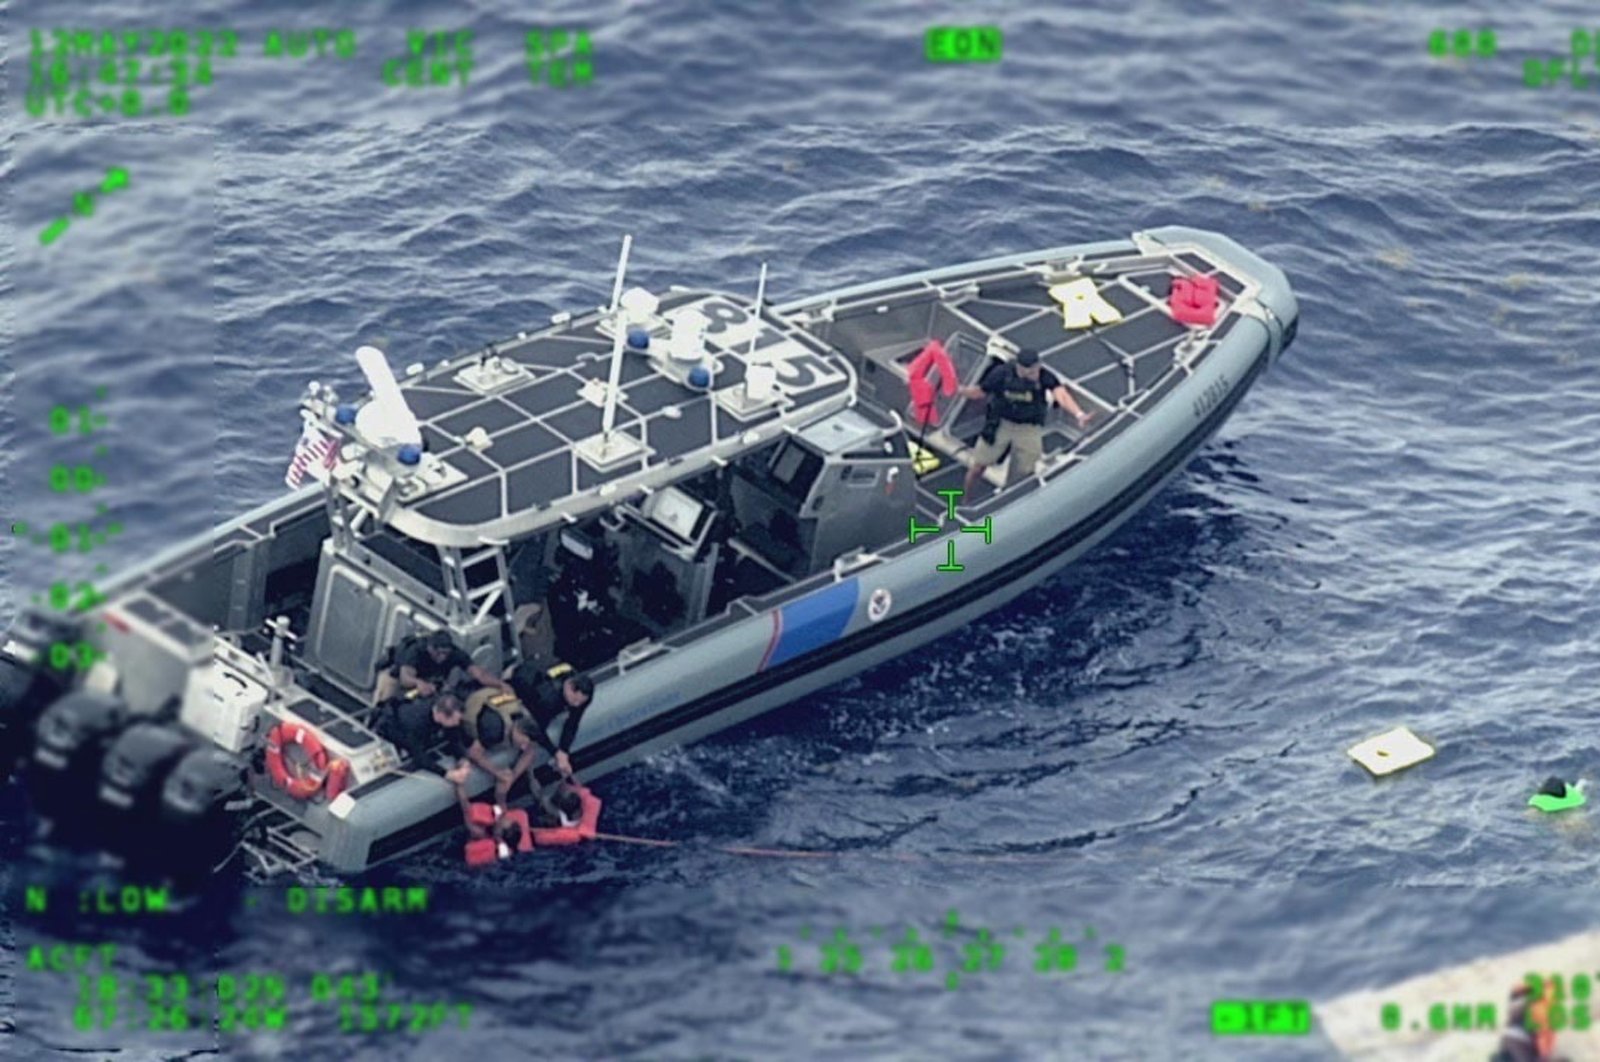 A handout photo shows U.S. Coast Guard air and surfaces rescue crews, Customs and Border Protection law enforcement boat crews and partner agencies respond to an unidentified amount of people in the water, Puerto Rico, May 12, 2022. (EPA Photo)